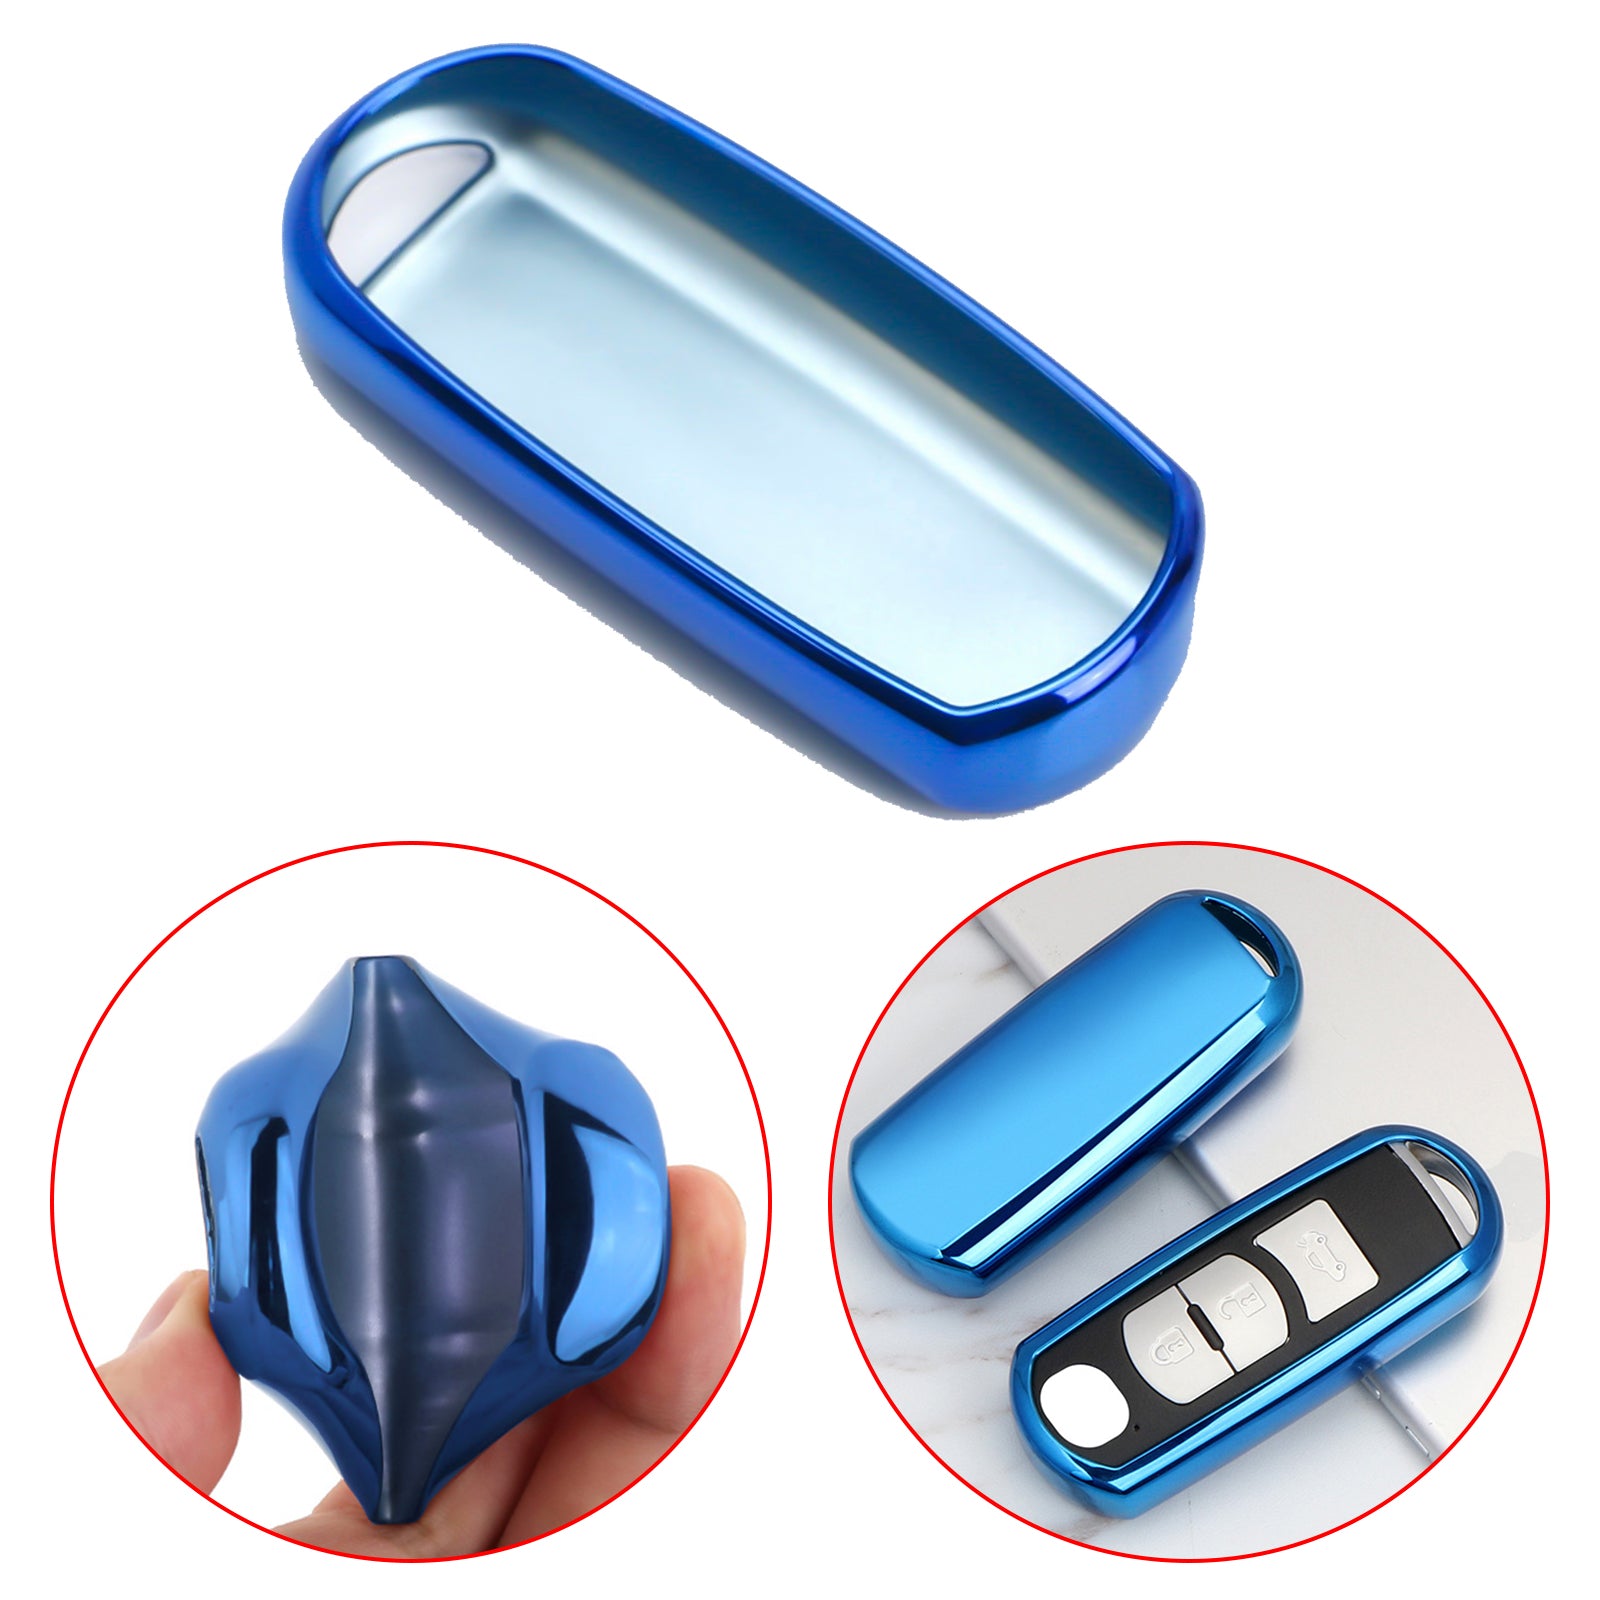 23 Buttons Car Remote Key Shell Keyless Entry For Mazda 2 3 6 323 626 Fob  Control Key Case Cover